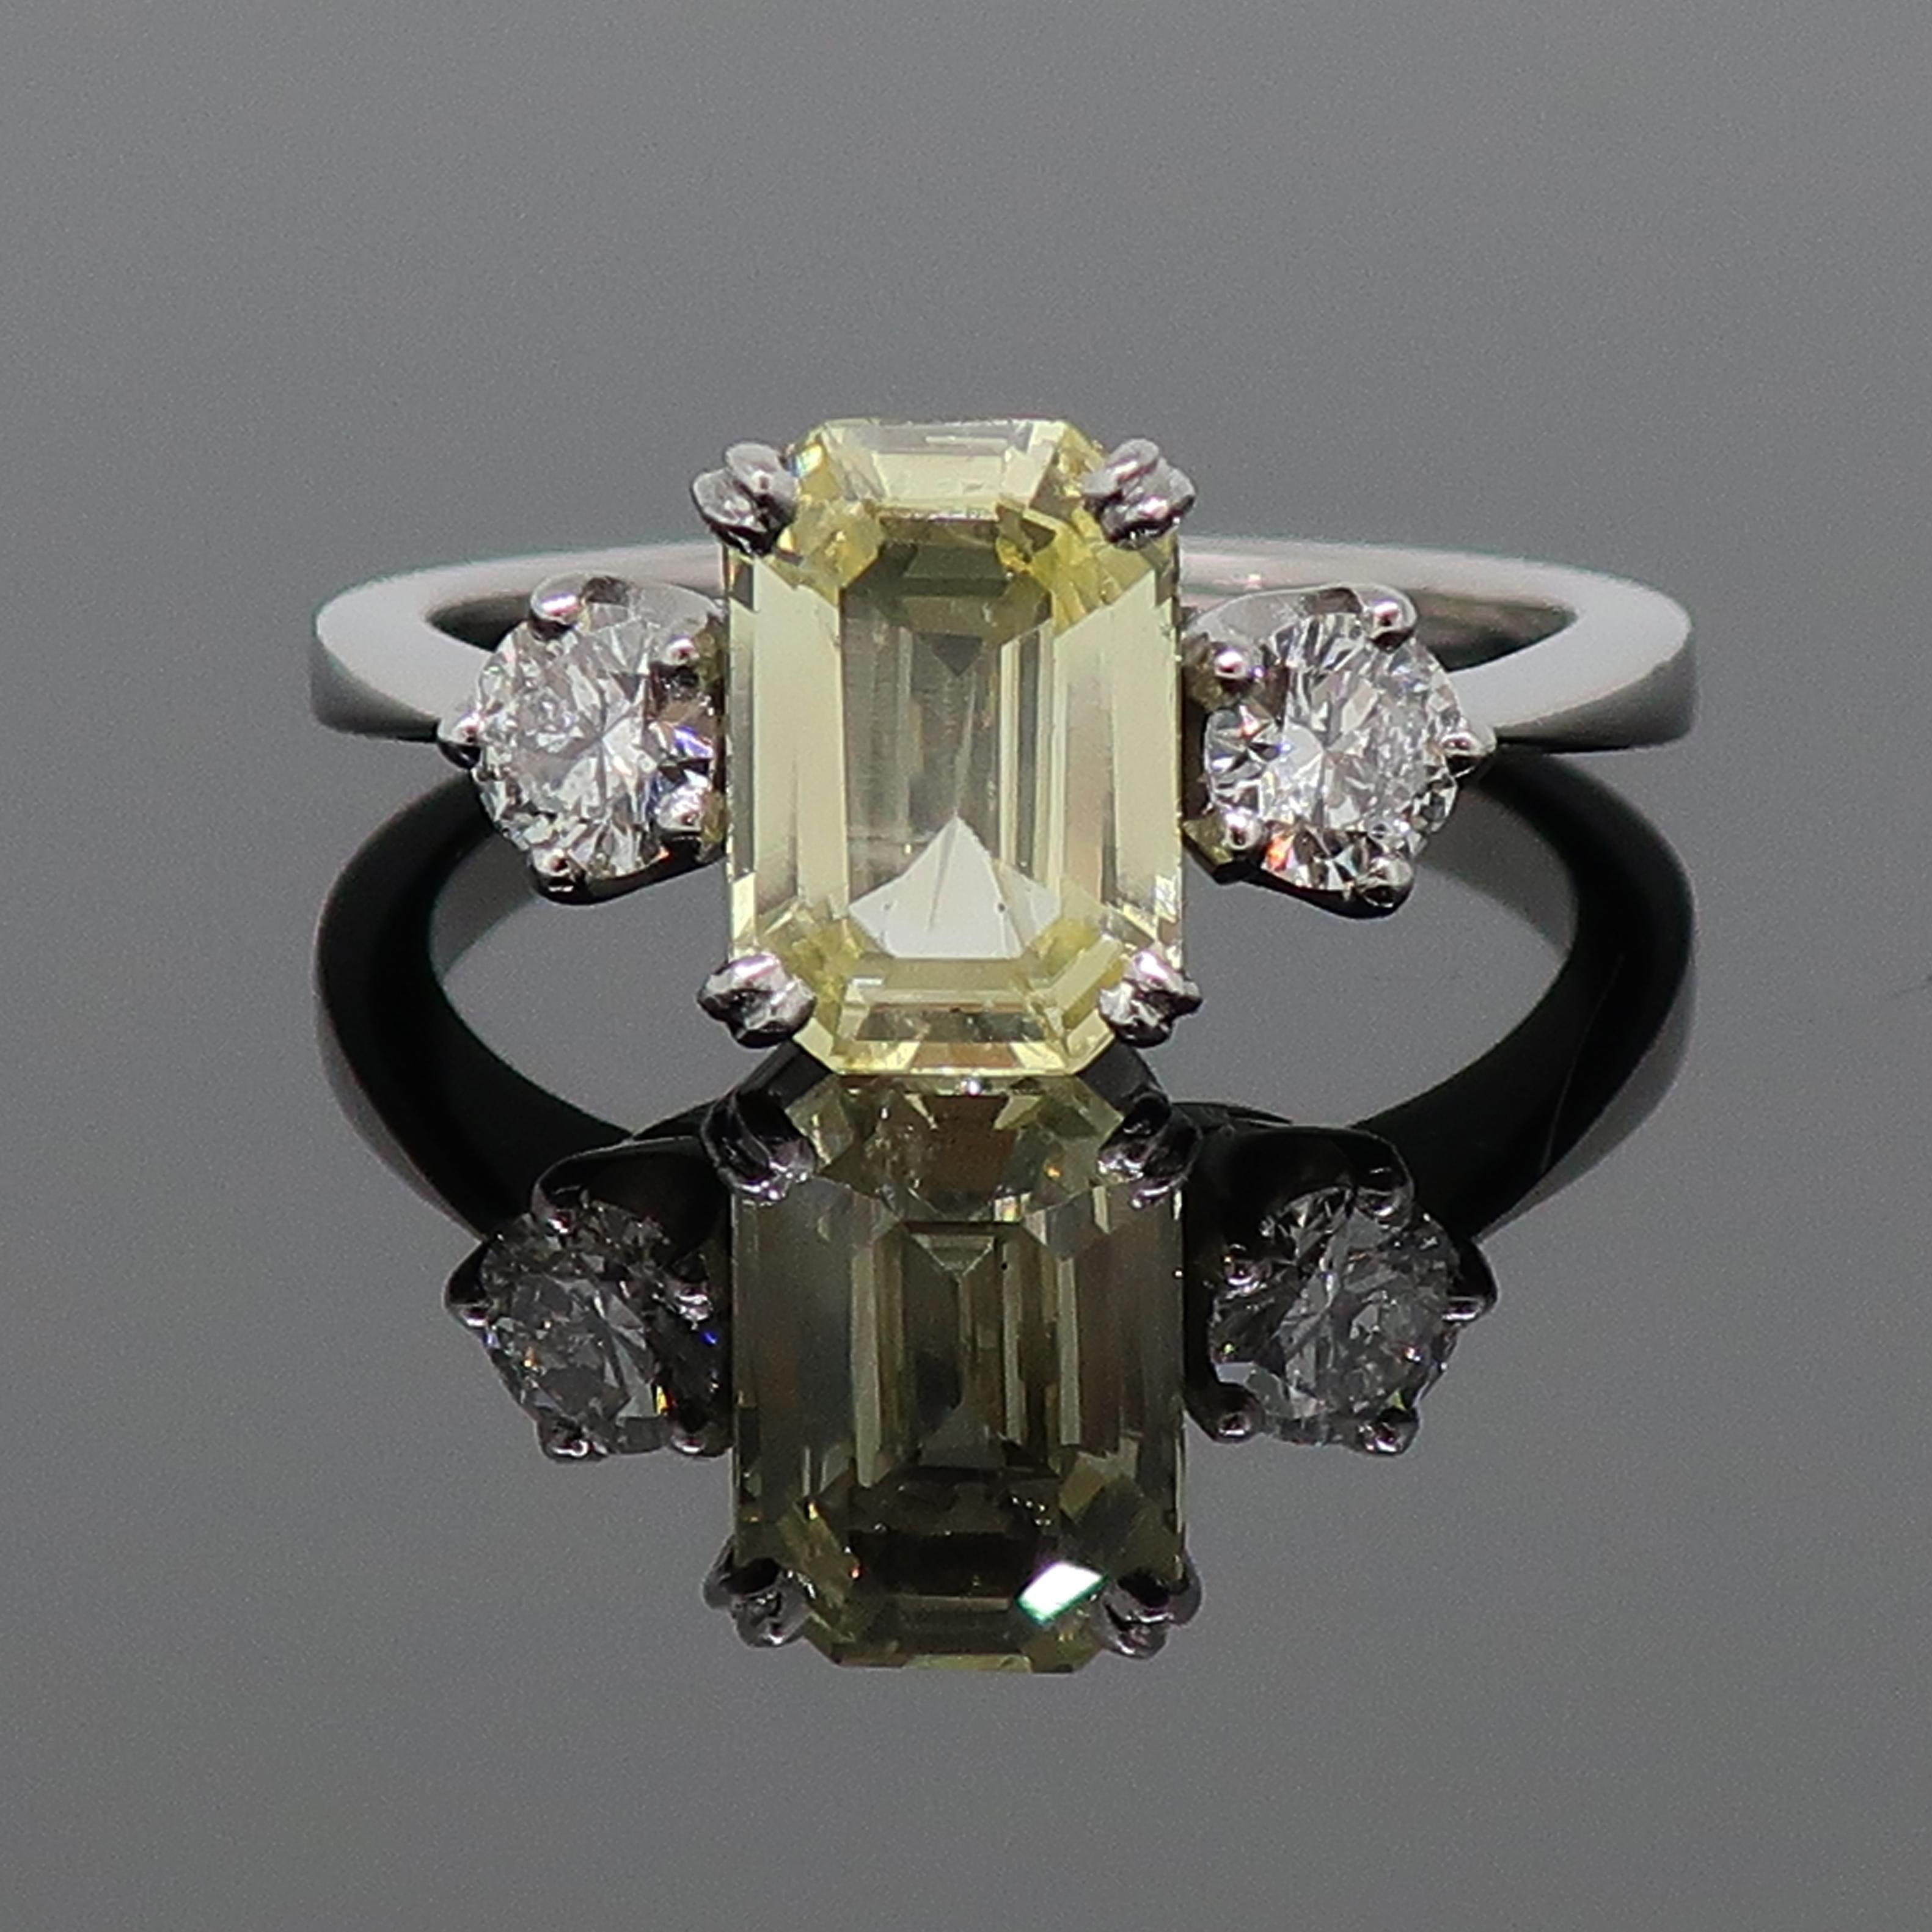 Yellow Sapphire and Diamond Three-Stone Ring 18 Karat White Gold

An emerald cut yellow sapphire & diamond three stone ring. Pale central yellow sapphire measuring 9.5mm x 6.6mm, set in four double claws, with a brilliant cut diamond either side set